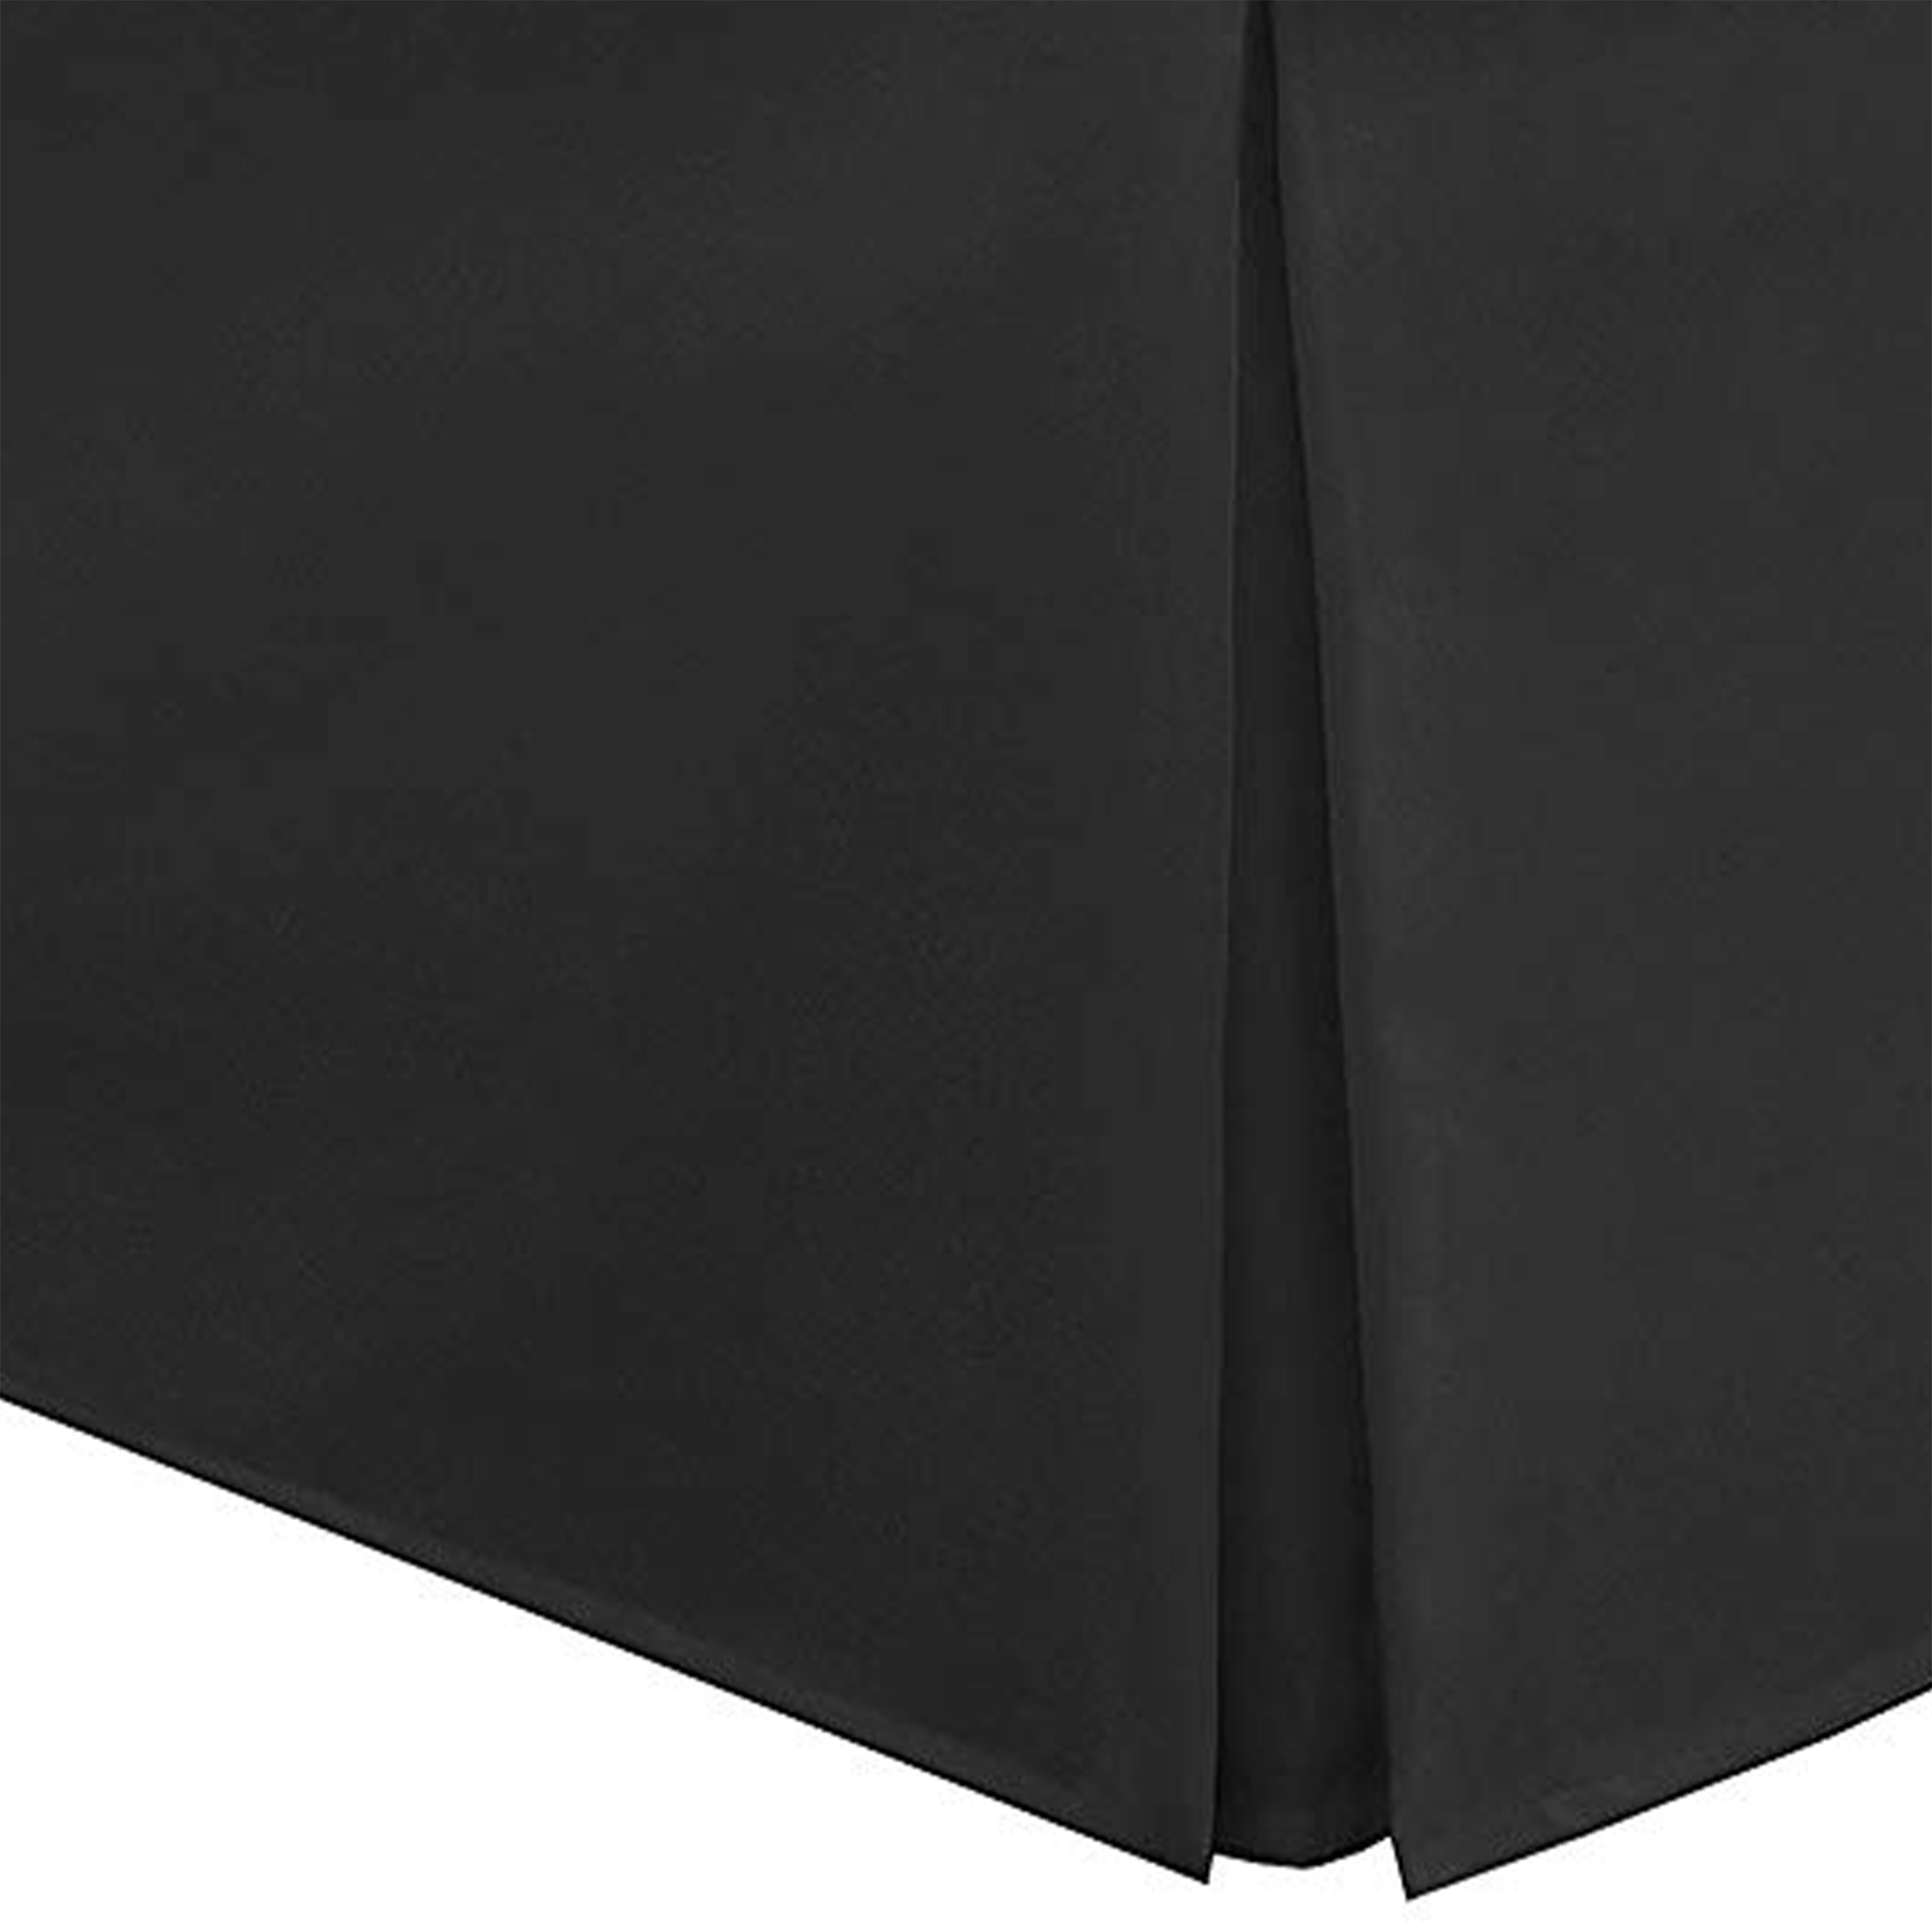 Fresh Ideas Bedding Tailored Bed Skirt, Classic 14” Drop Length, Pleated Styling, Twin, Black - image 4 of 6